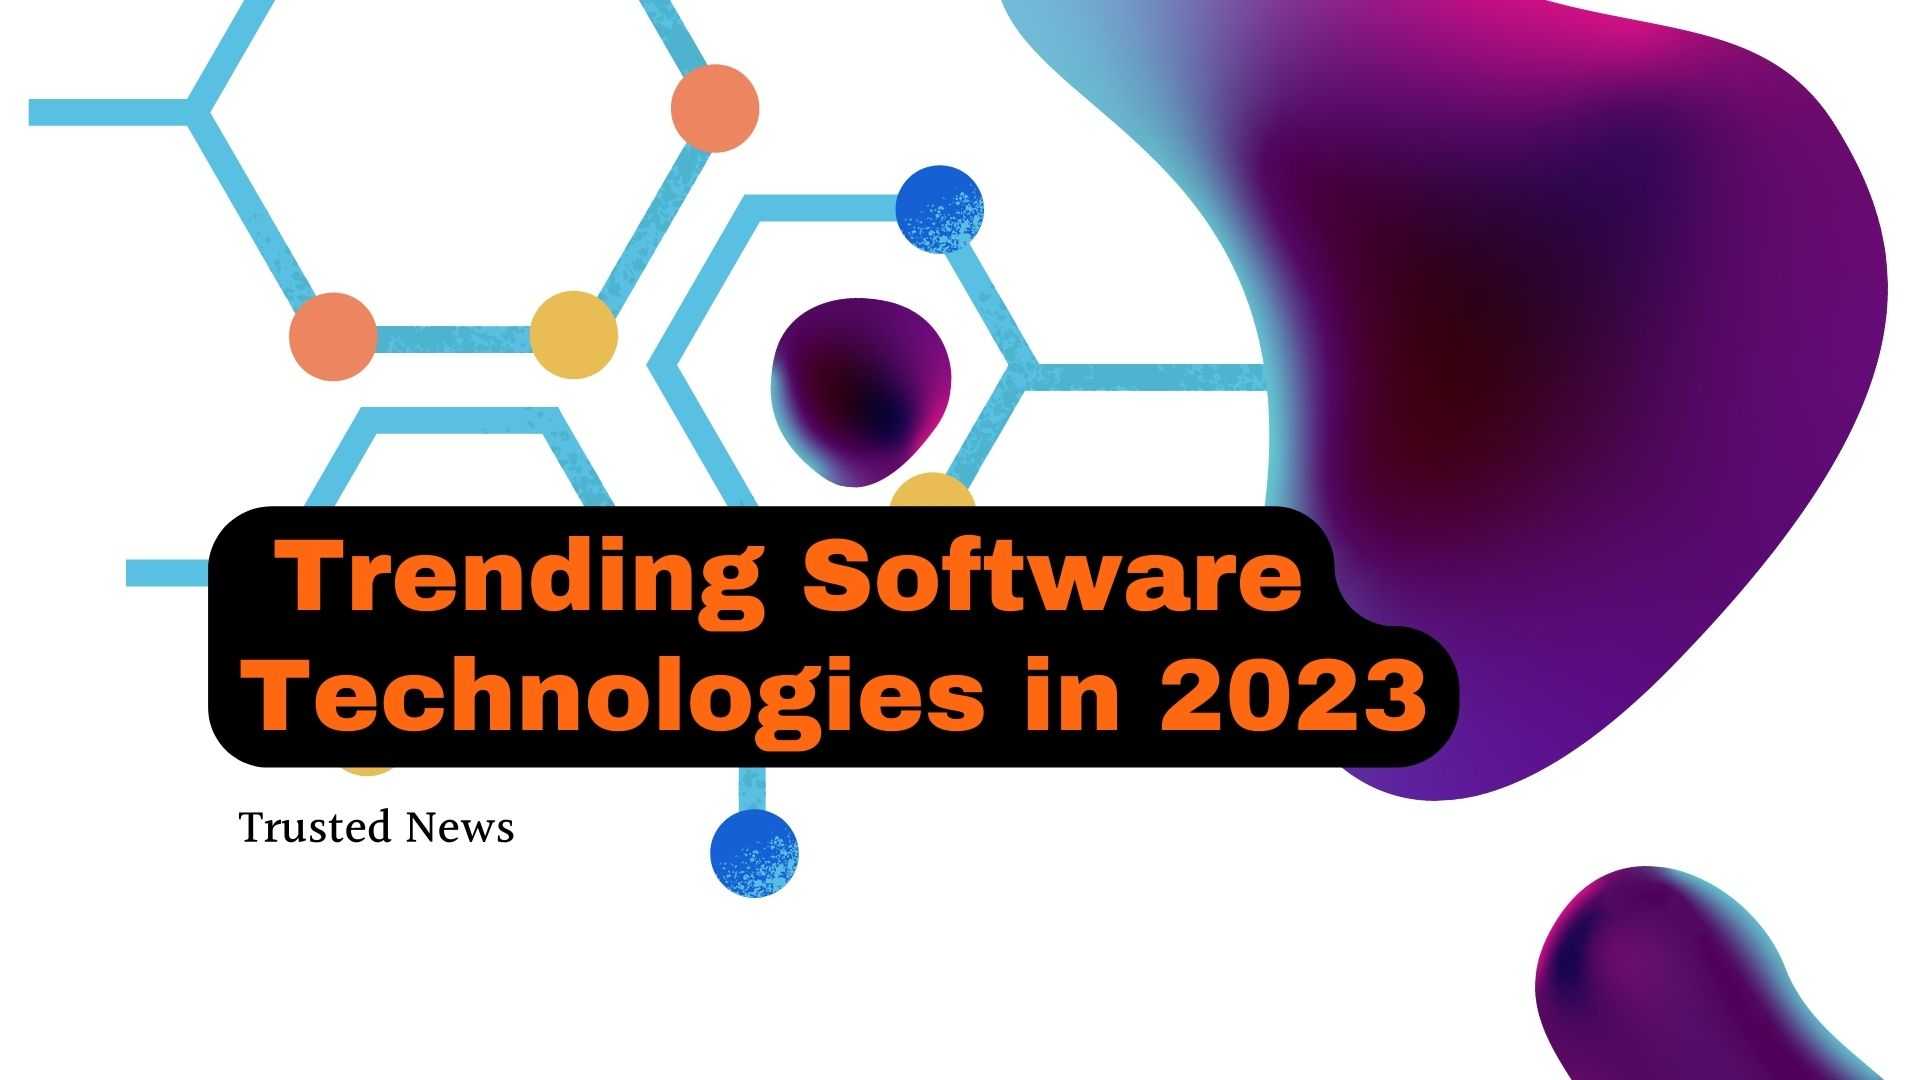 The Latest Trends in Software Technologies & The Benefits in 2023